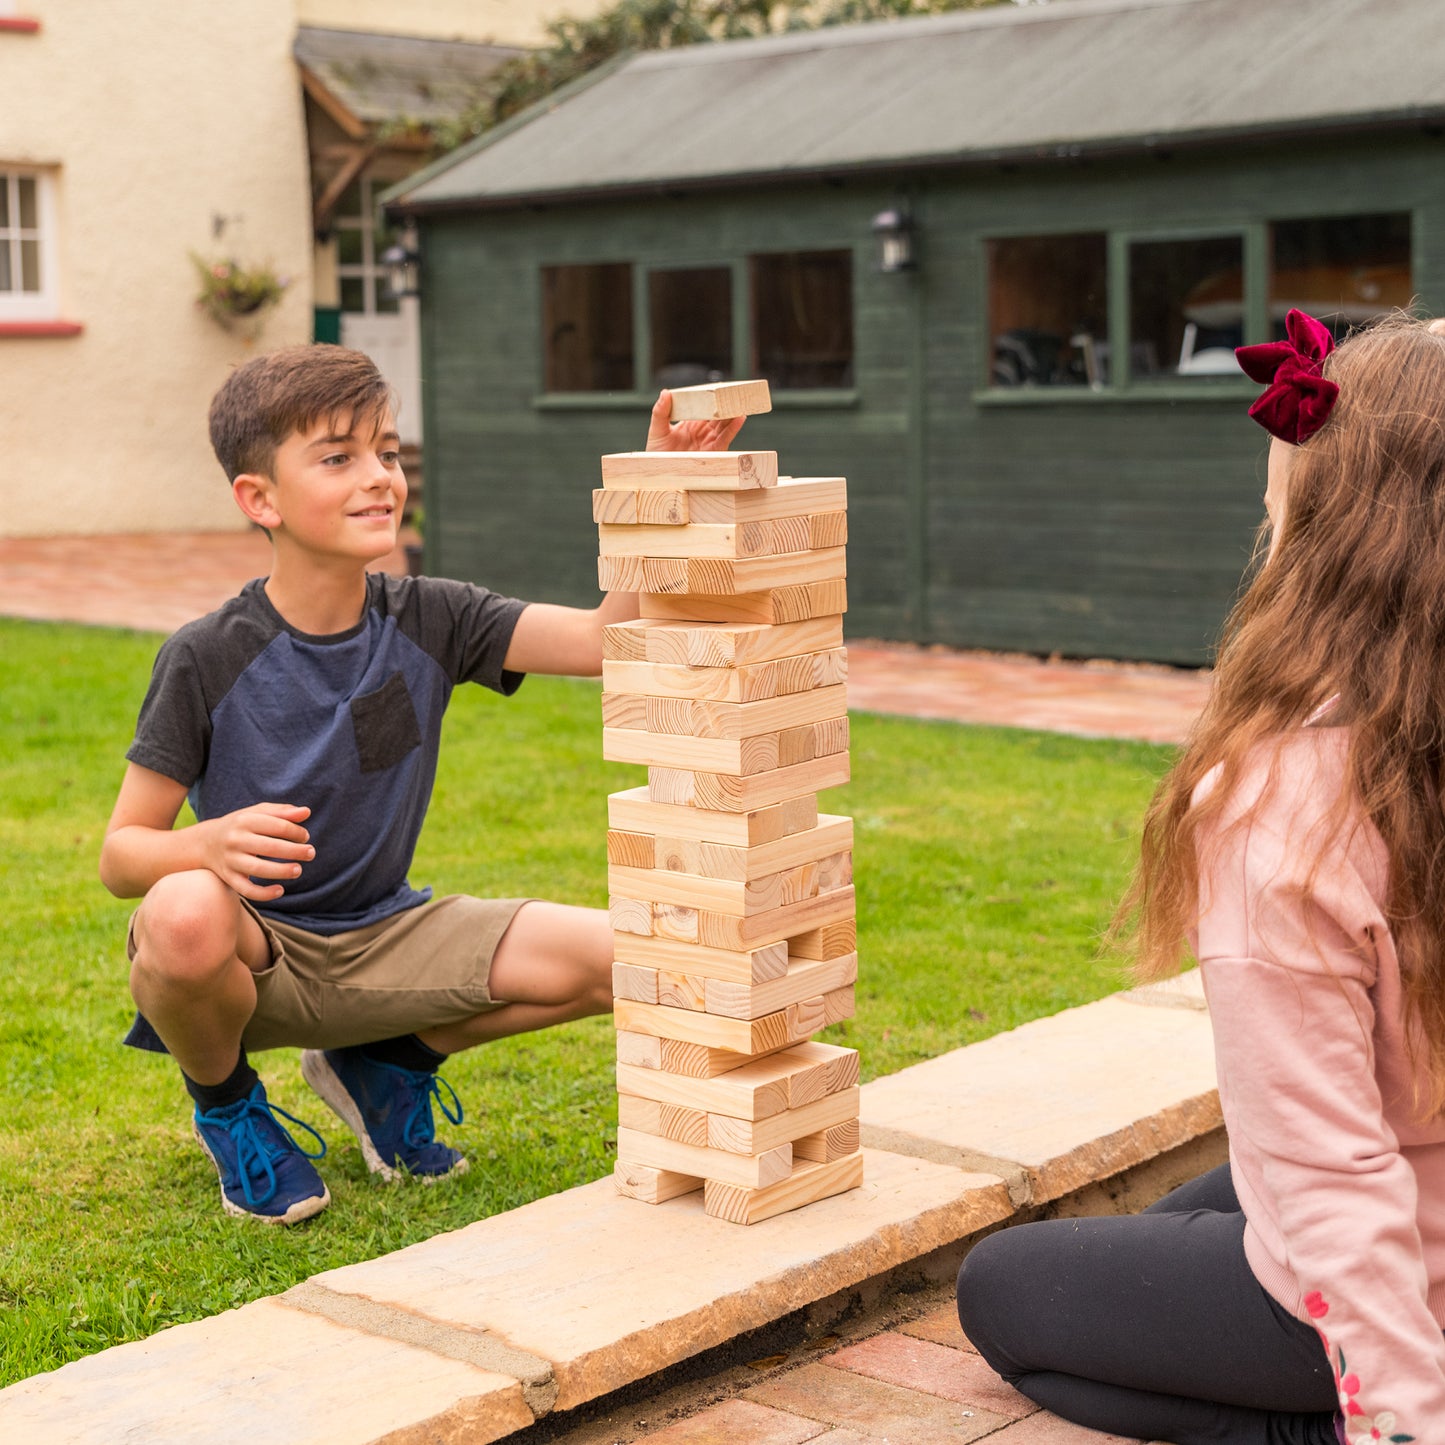 Garden Games Giant Stack 'N' Fall